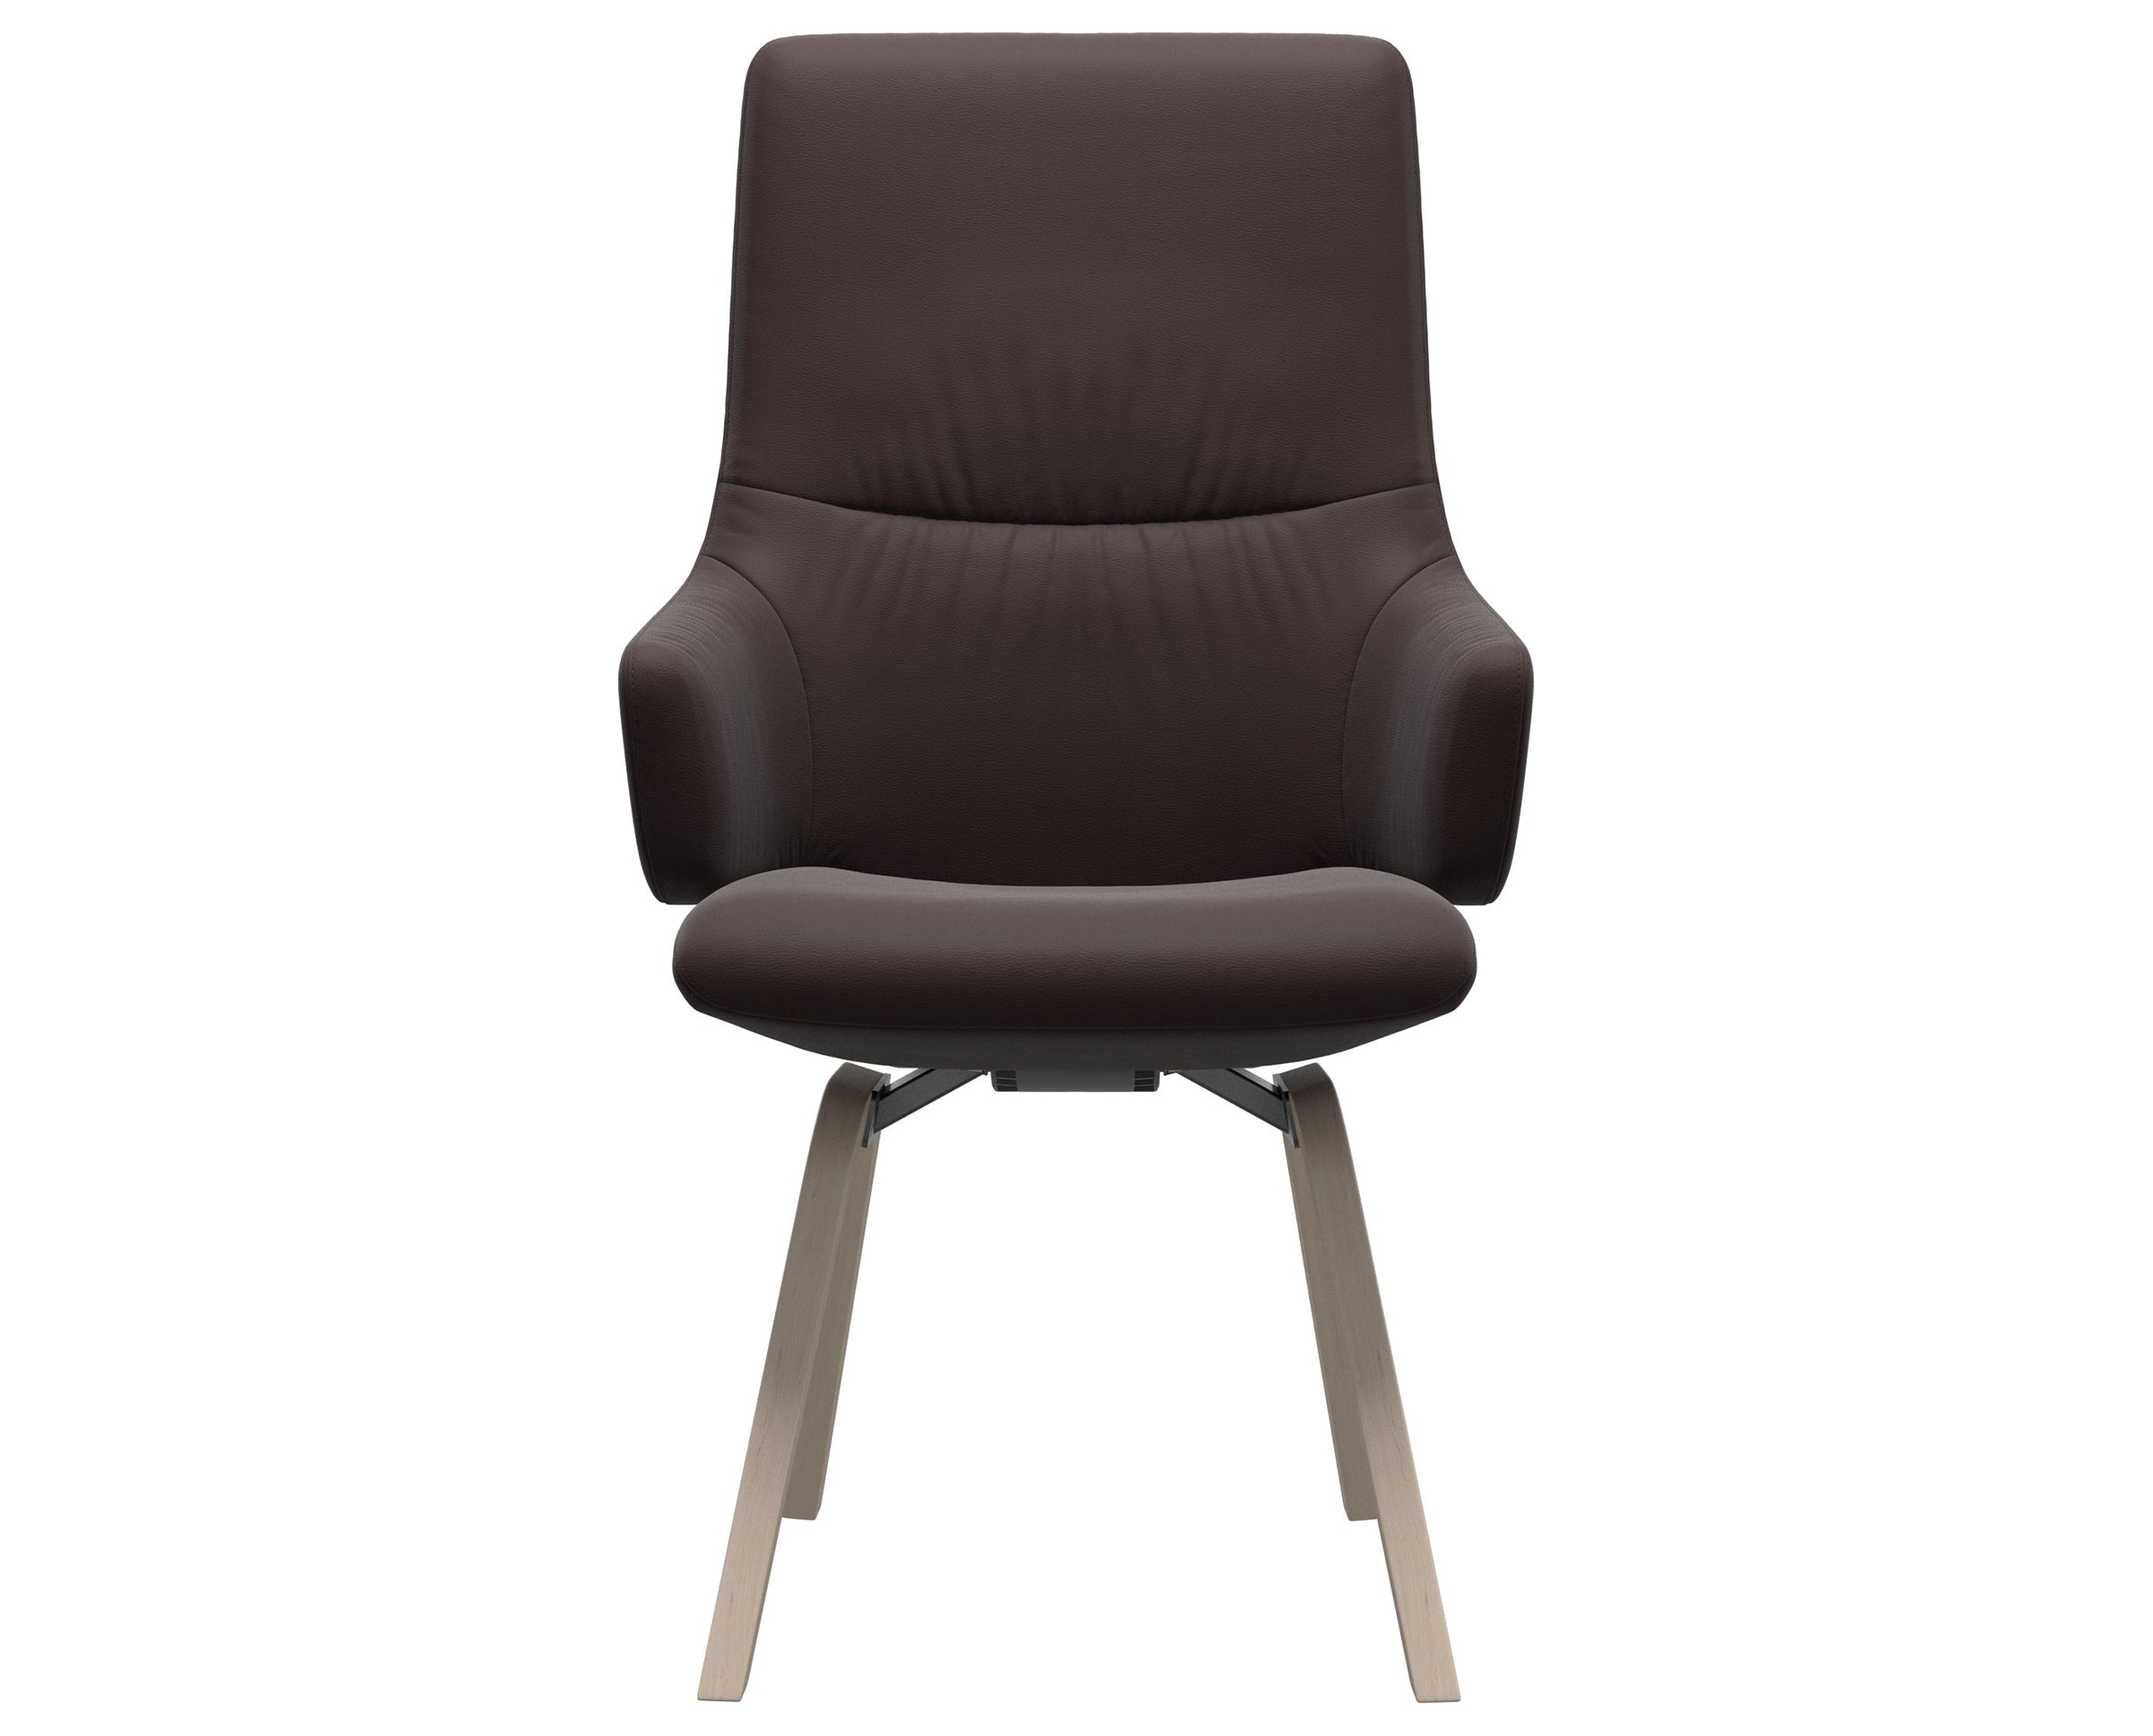 Paloma Leather Chocolate and Whitewash Base | Stressless Mint High Back D200 Dining Chair w/Arms | Valley Ridge Furniture